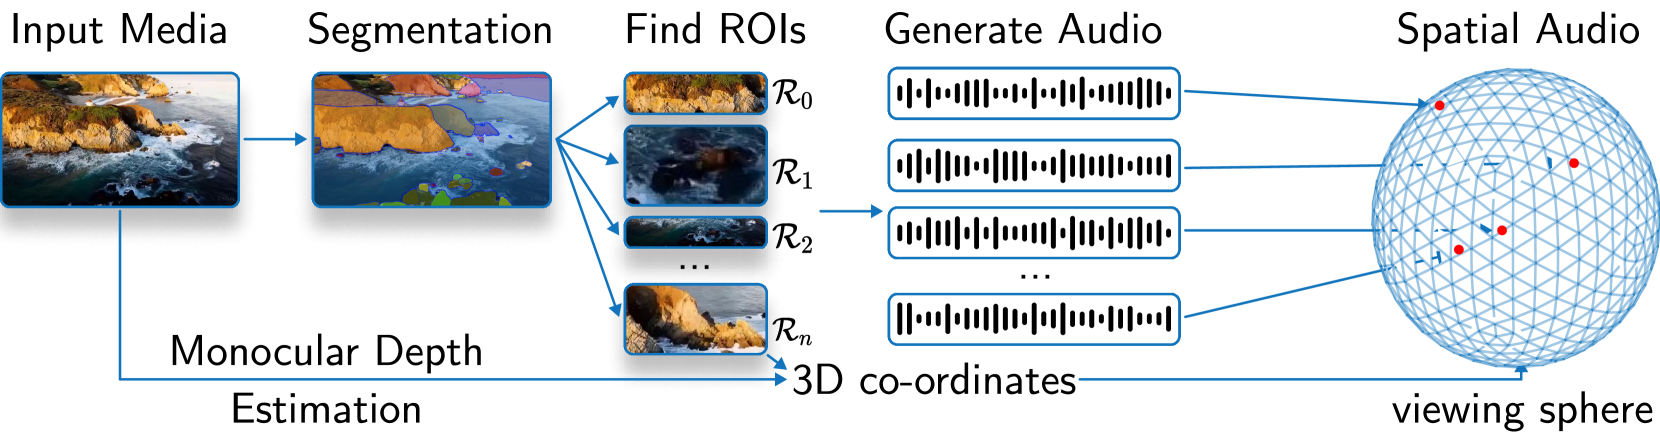 We show an overview of how our approach works. First, we perform image segmentation and find regions of interest for different objects in the image. We also perform monocular depth estimation on the image and produce 3D coordinate estimating positions for each object in the scene. We then generate mono-audio from the regions of interest. Finally, we place all of these audio according to the 3D coordinates on a viewing sphere producing spatial or surround sound.